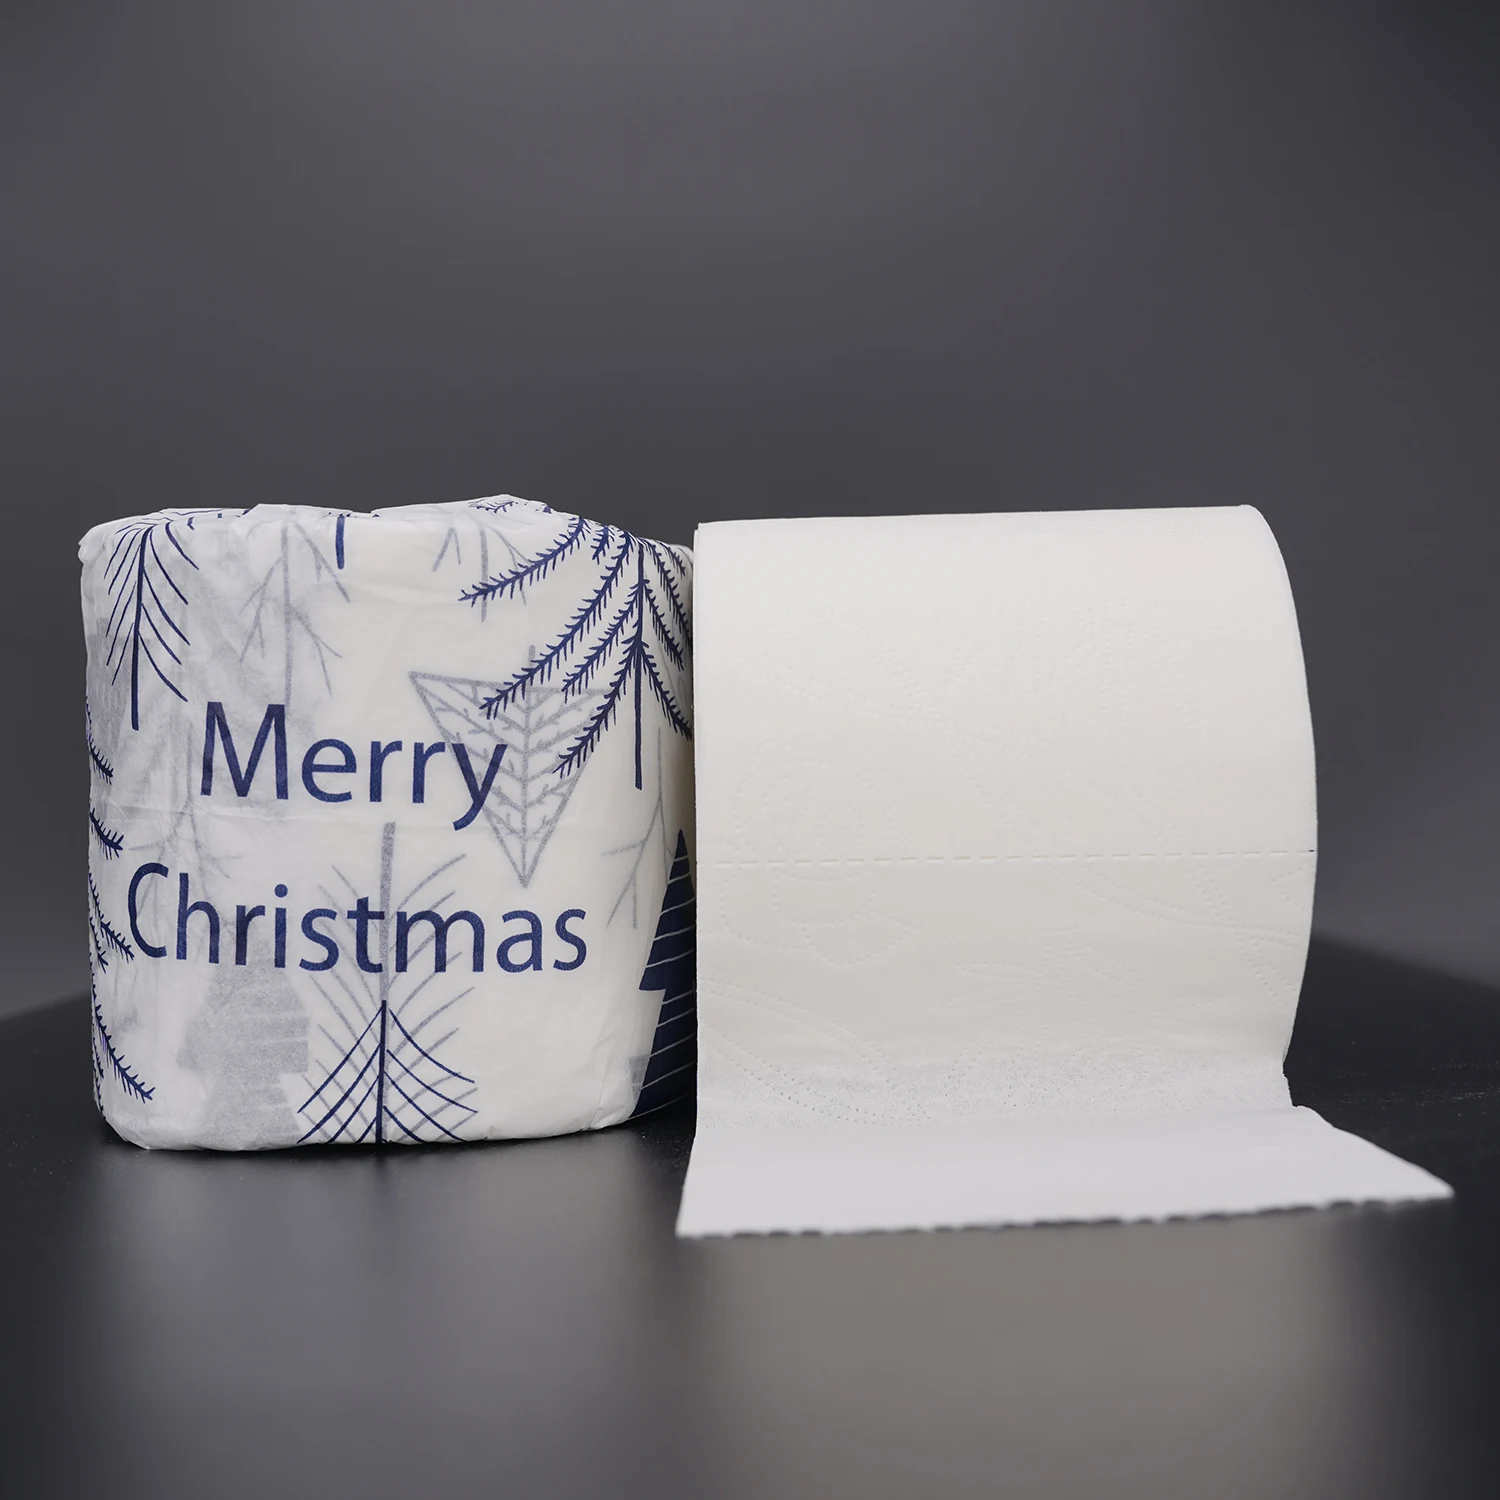 Bamboo Paper Rolls Tissue Paper Natural Material White Bathroom Toilet Paper (1600550182336)